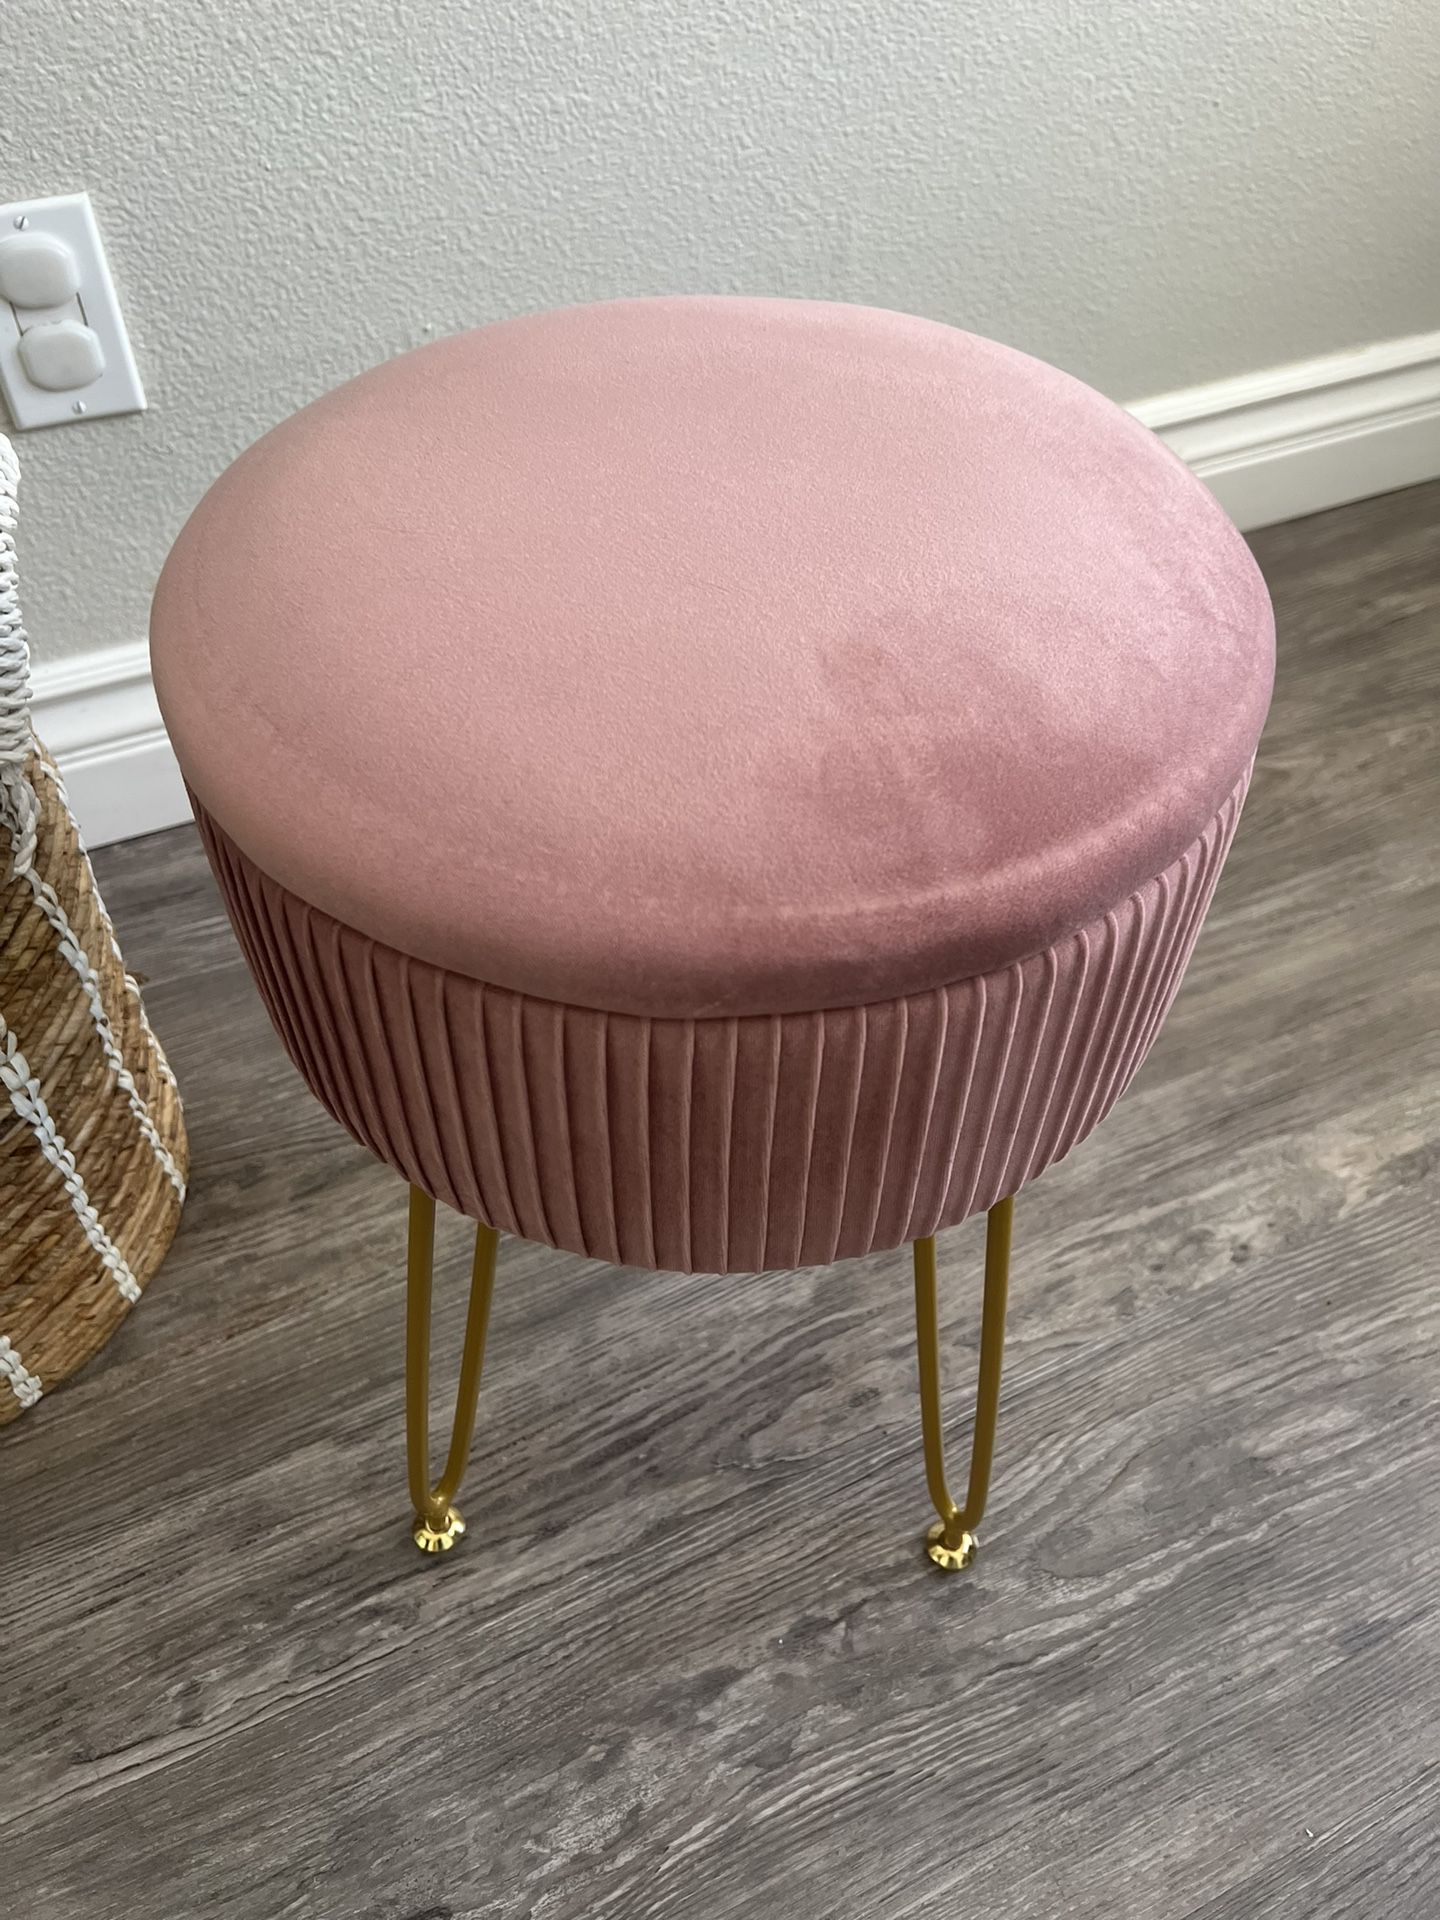 Urban Deco Velvet Storage Ottoman Foot Rest Makeup Footstool Velvet Footrest Chair with 4 Metal Legs Storage Stool and Ottomans for Living Room and Be